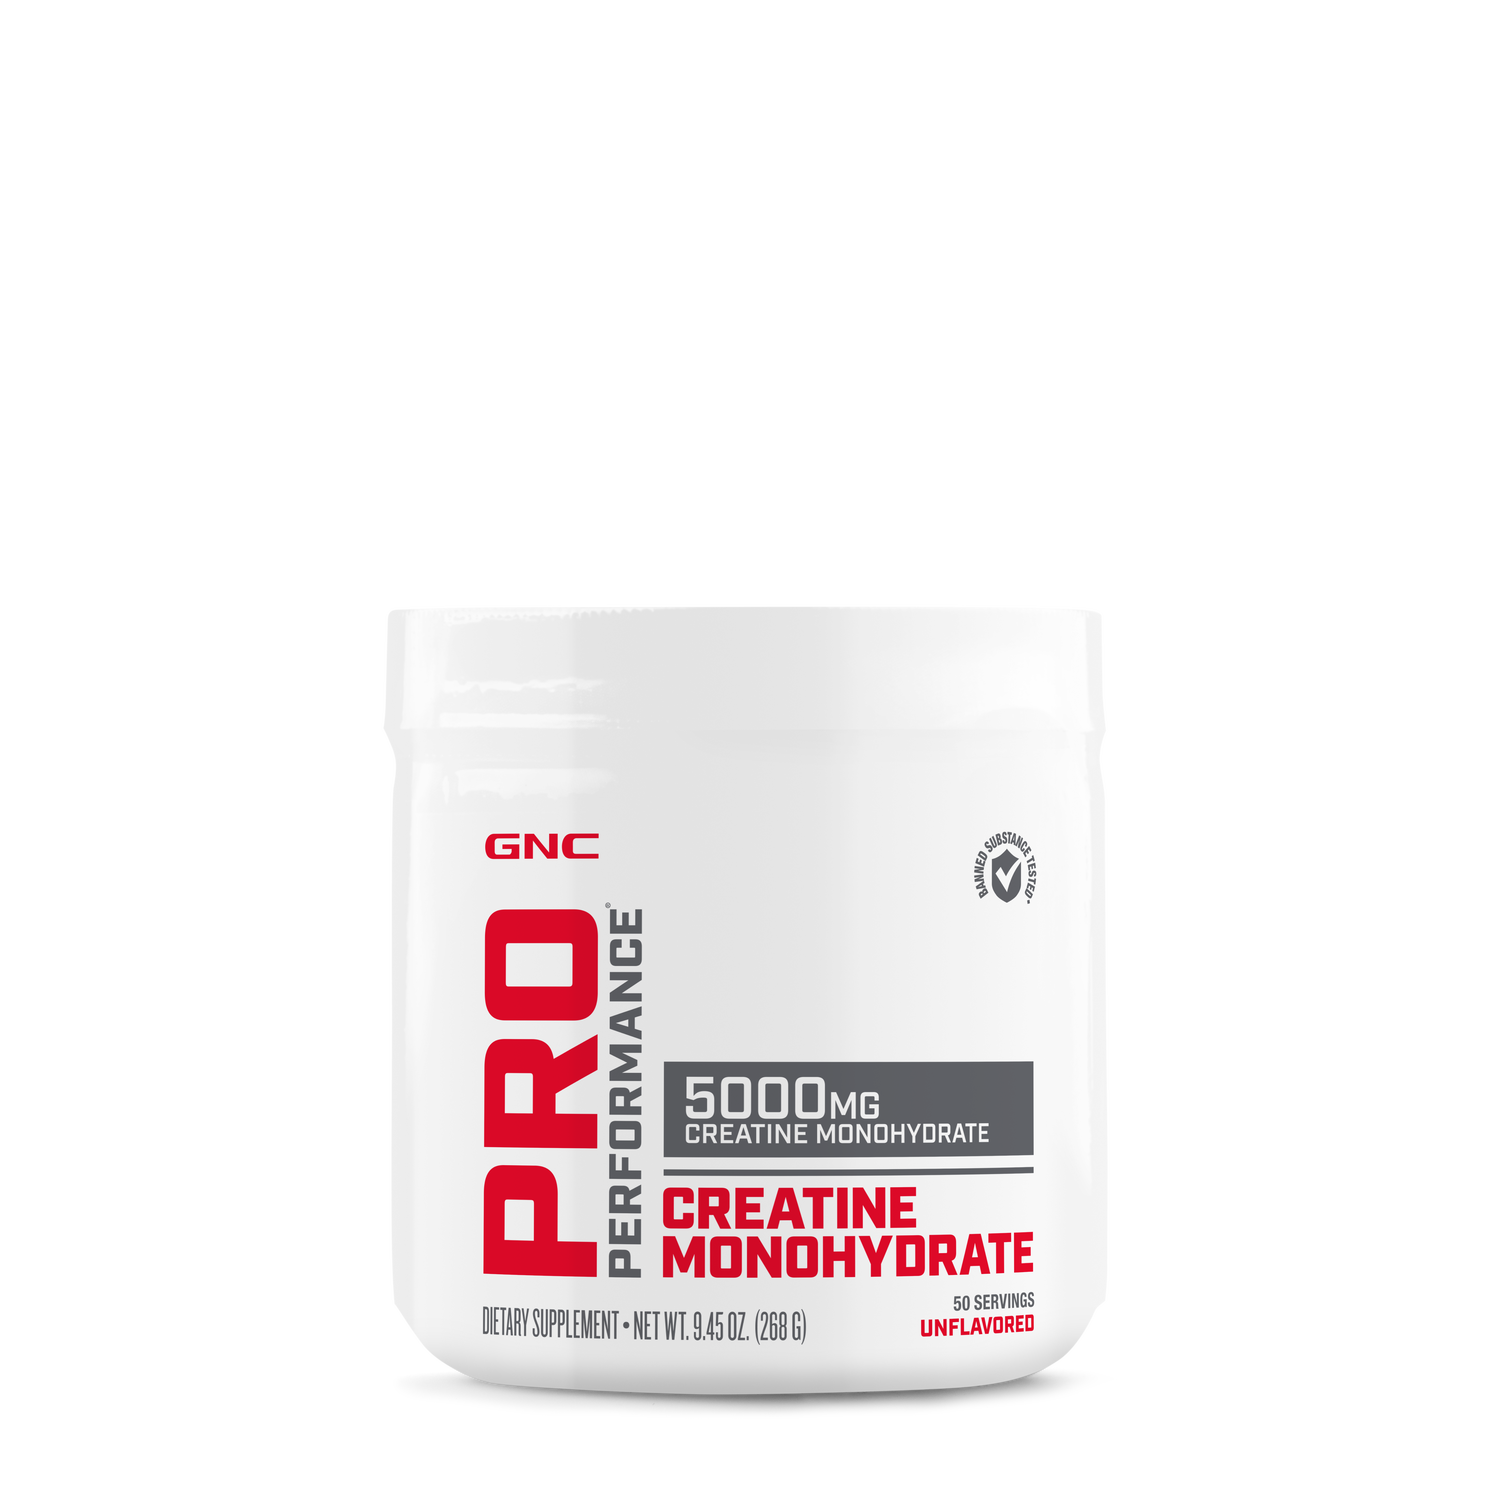 The protein works Creatine Monohydrate Review